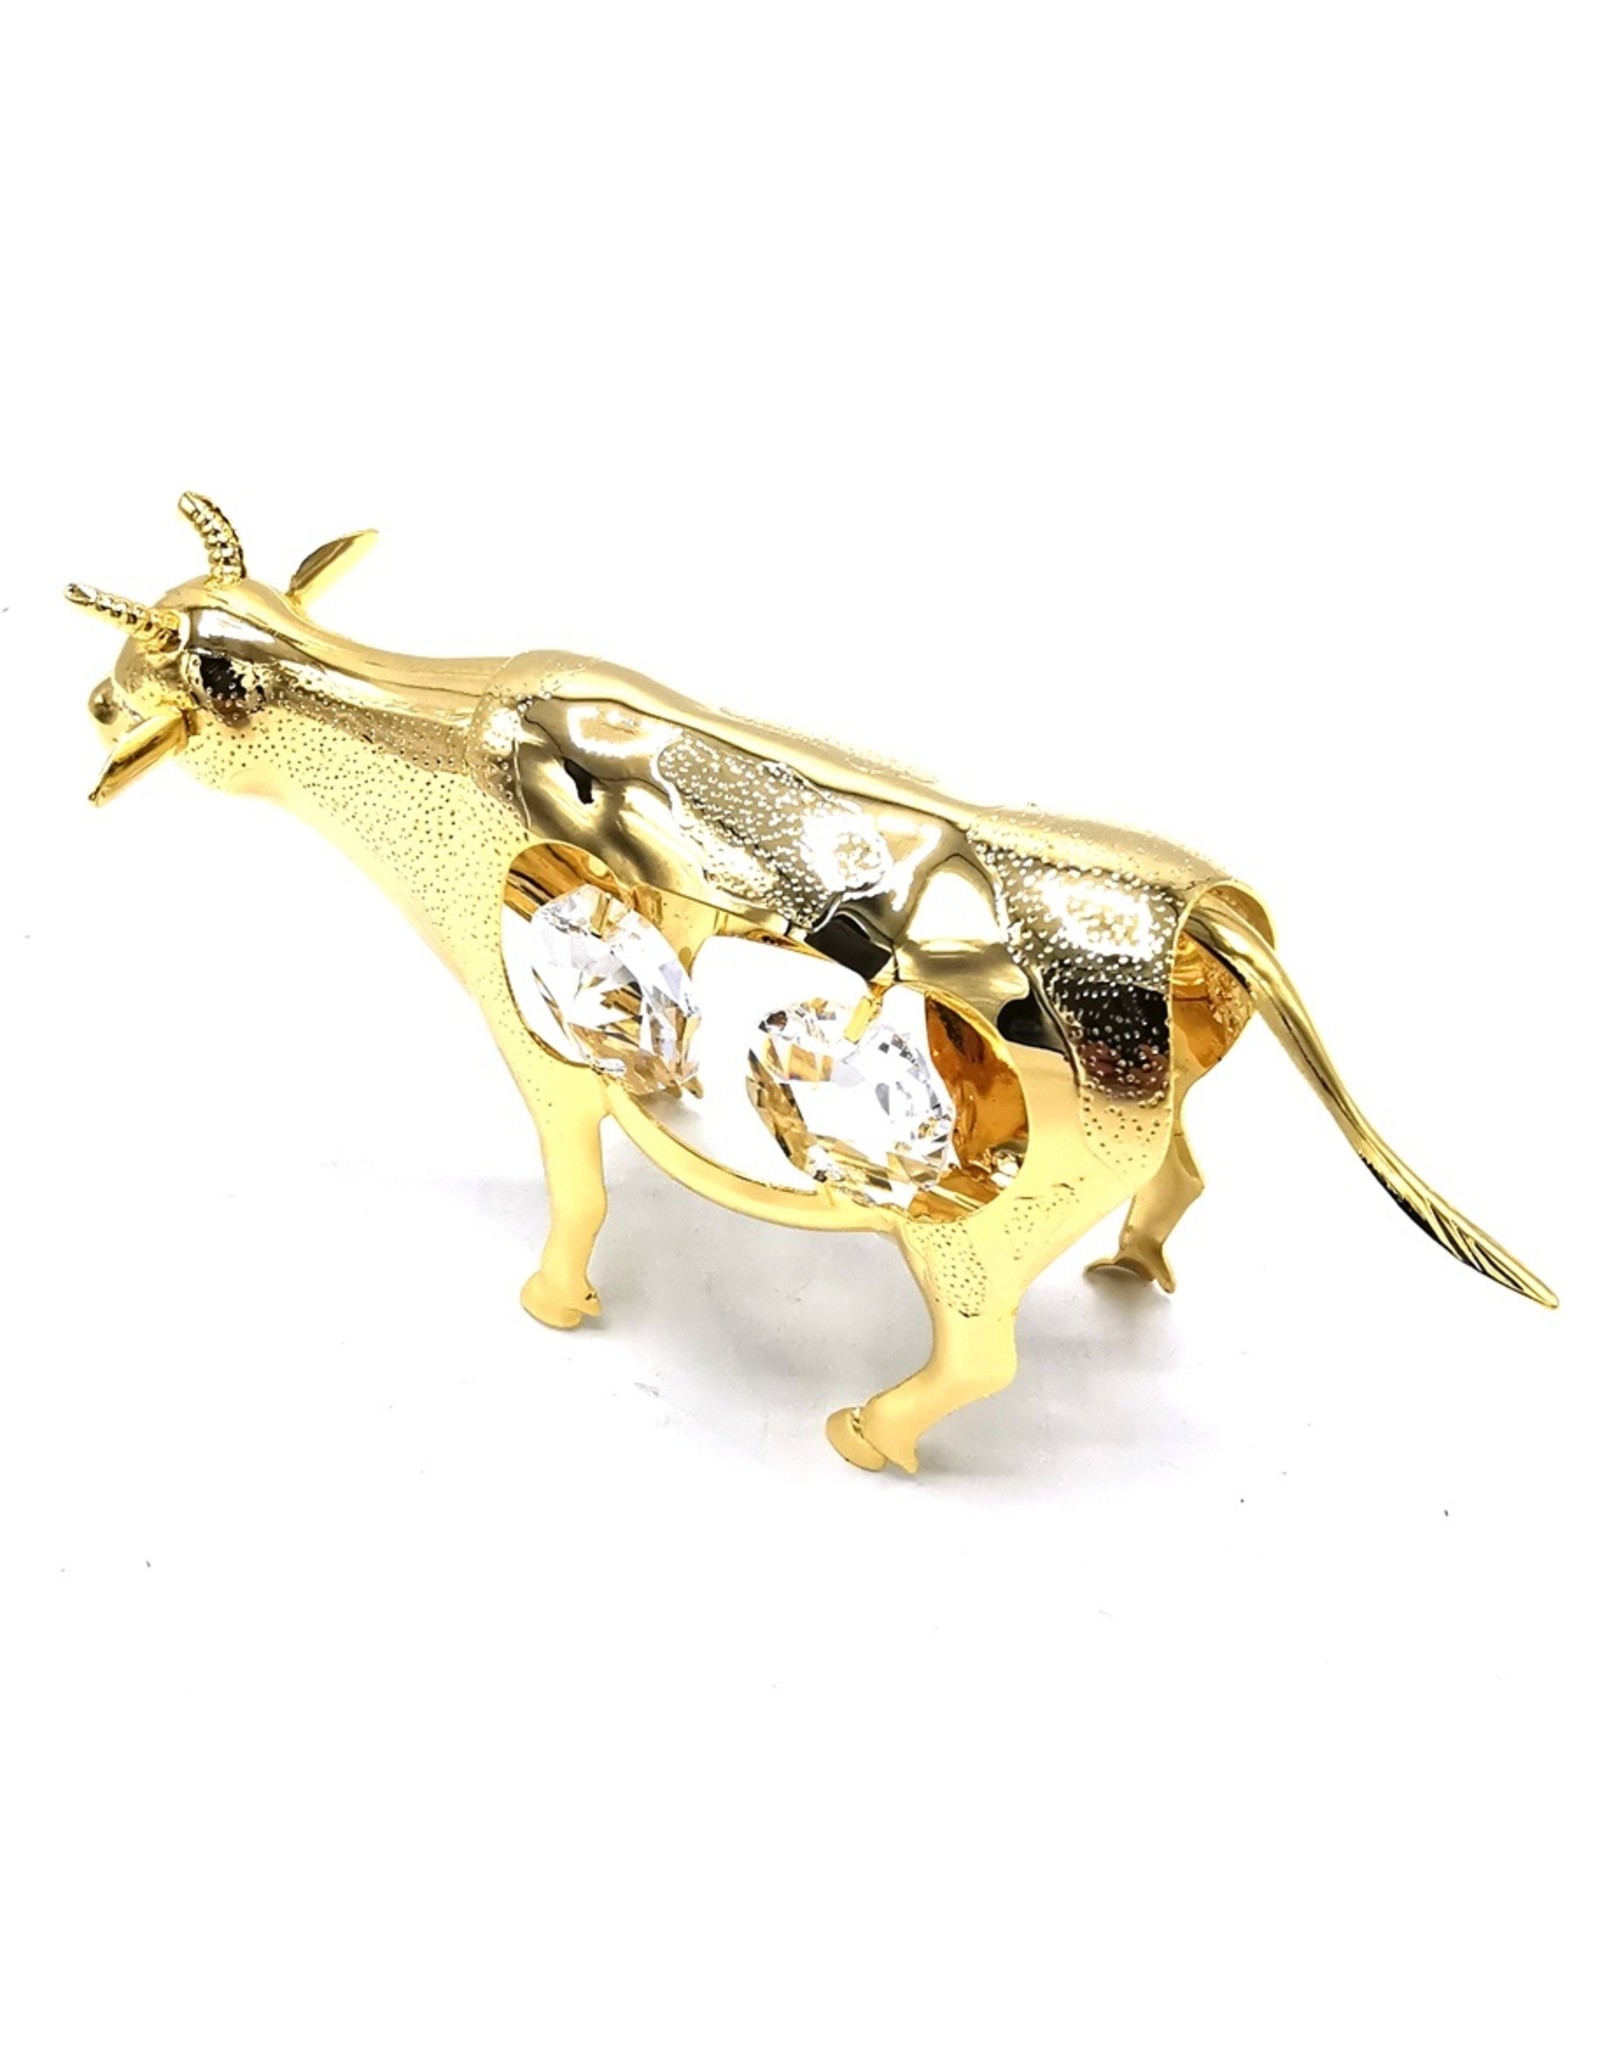 Crystal Temptations Miscellaneous - Miniature Cow Gold-plated and with Swarovski